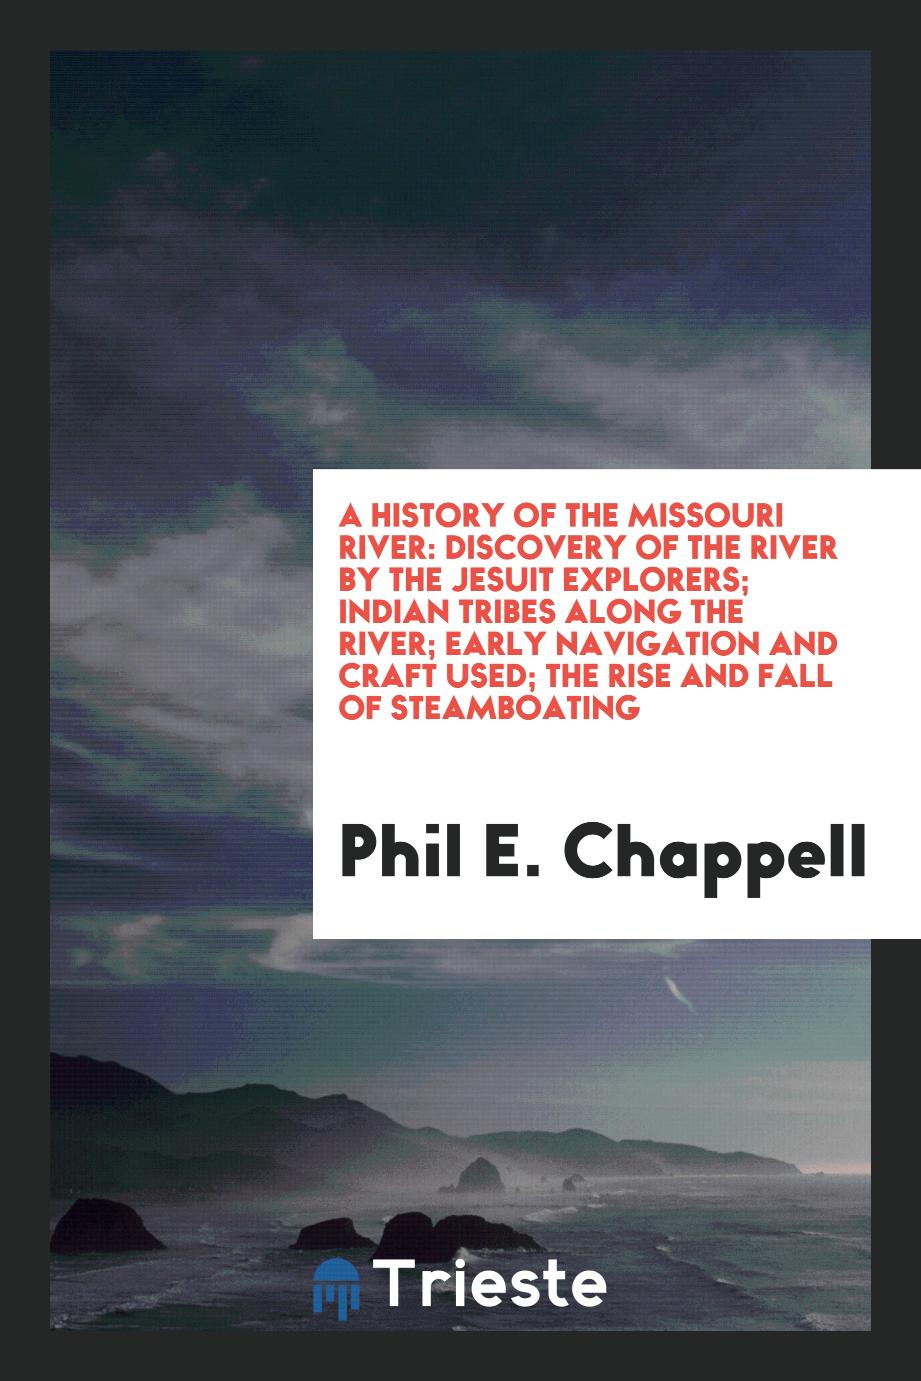 A History of the Missouri River: Discovery of the River by the Jesuit Explorers; Indian Tribes Along the River; Early Navigation and Craft Used; The Rise and Fall of Steamboating